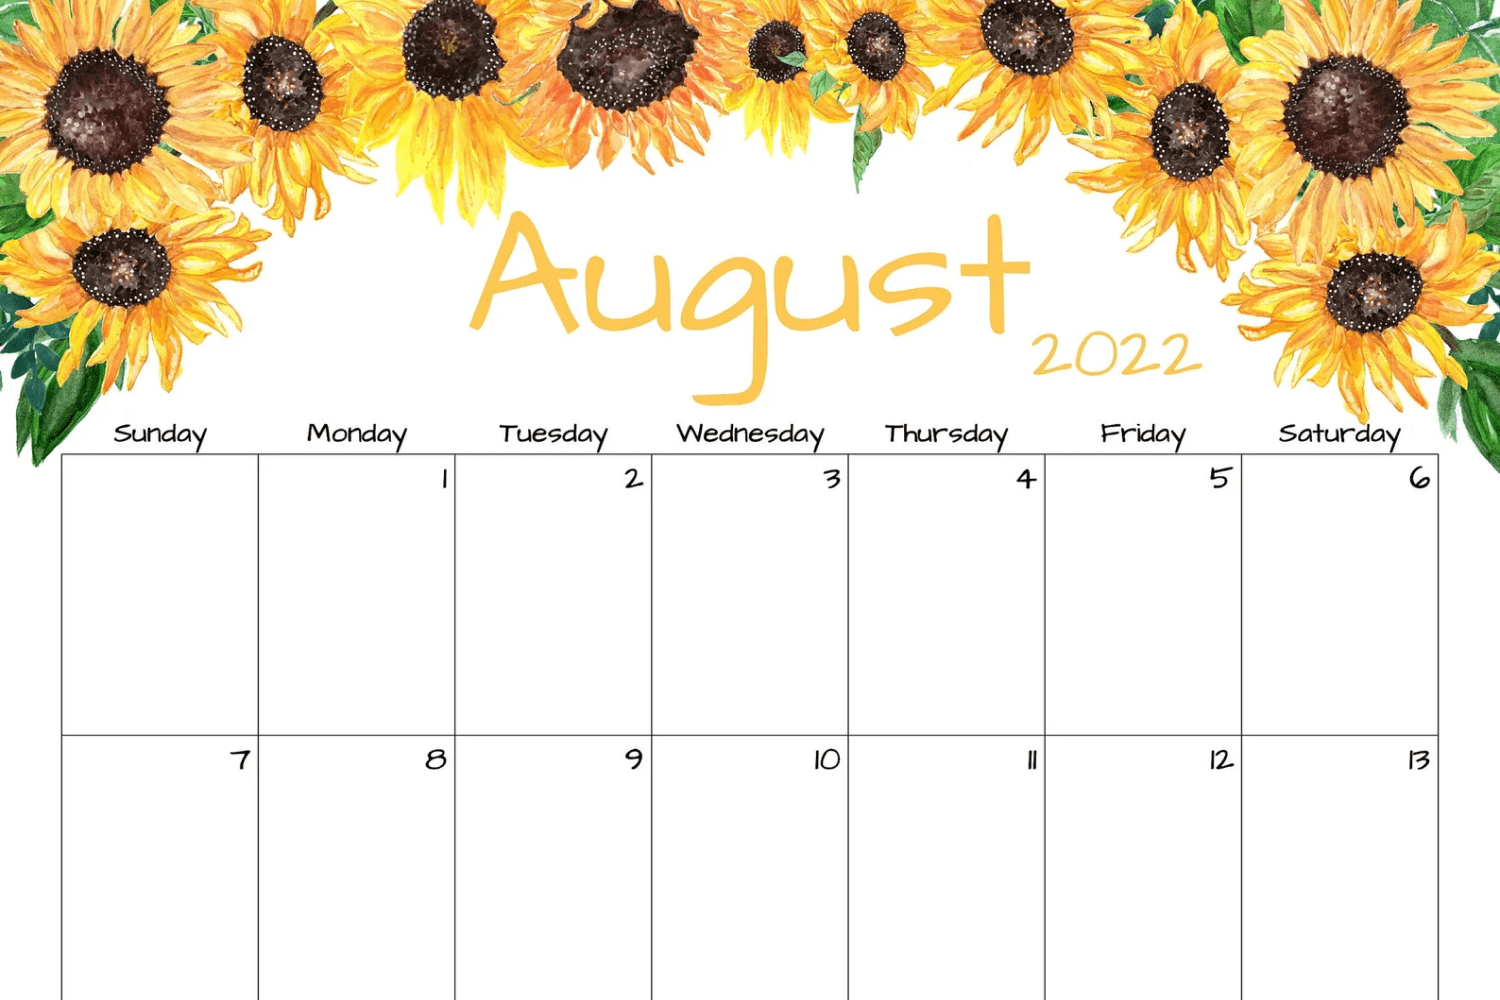 August calendar with drawn sunflowers.